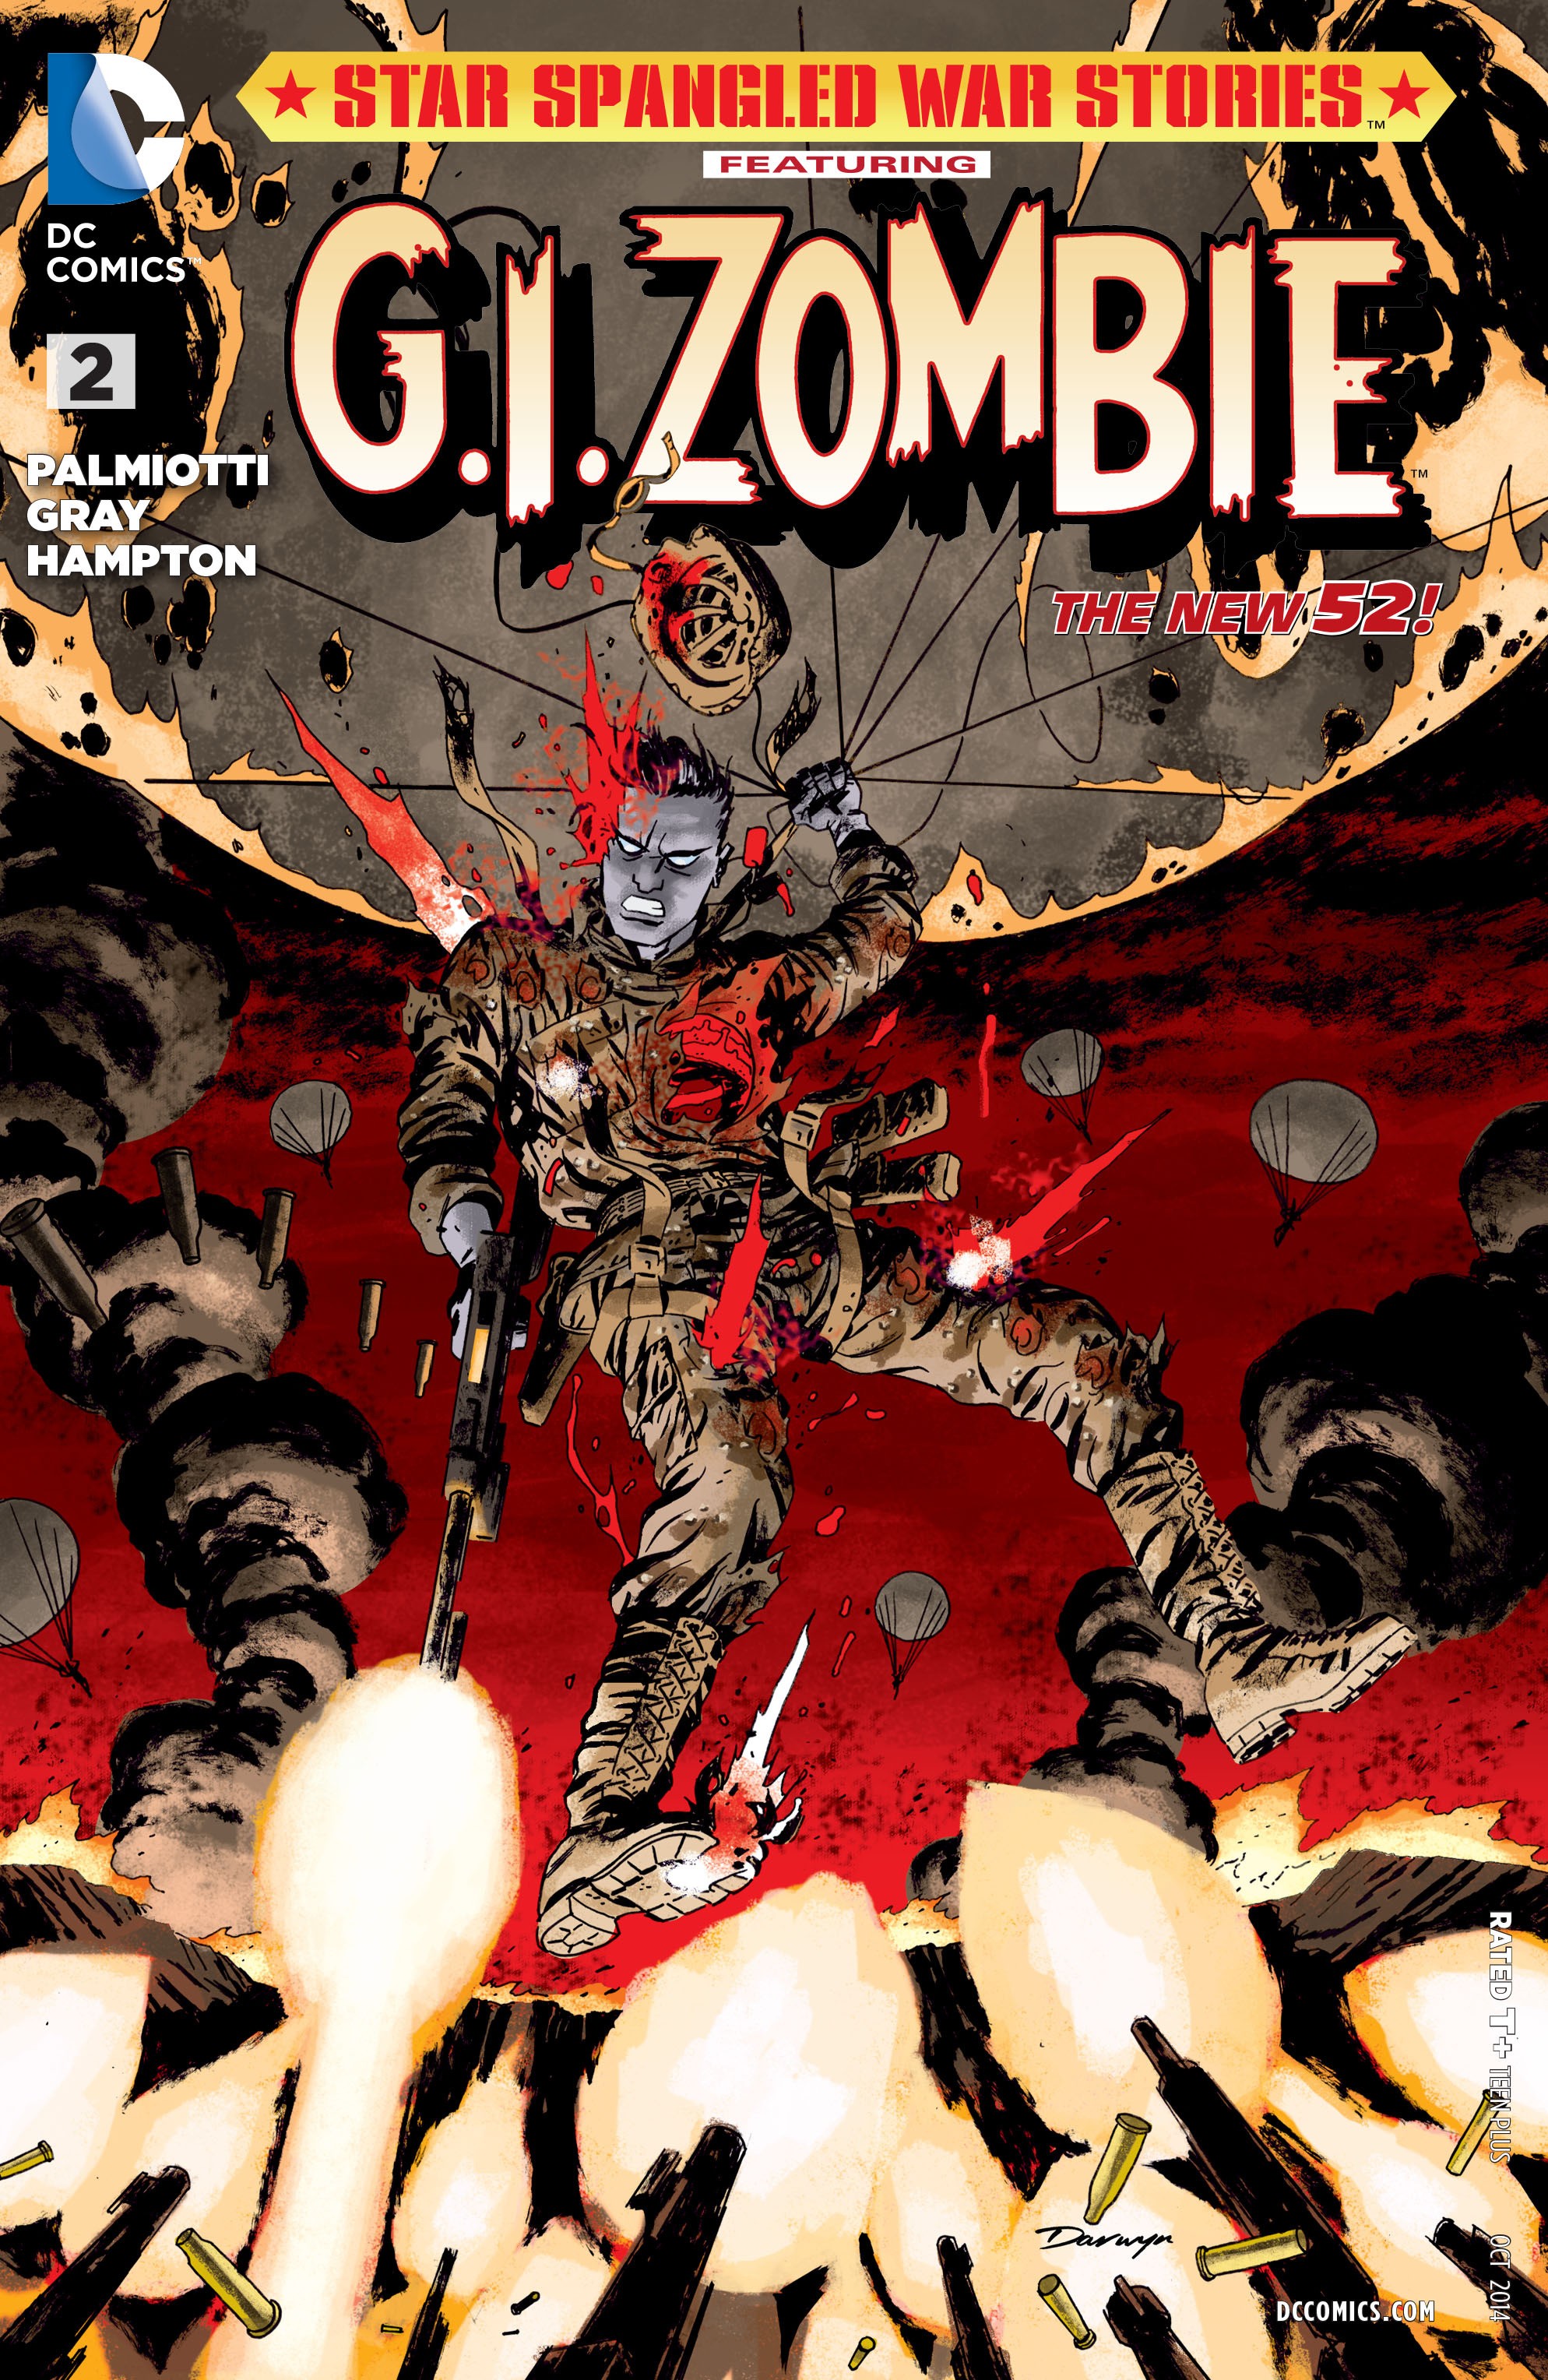 Star-Spangled War Stories Featuring G.I. Zombie Vol. 1 #2